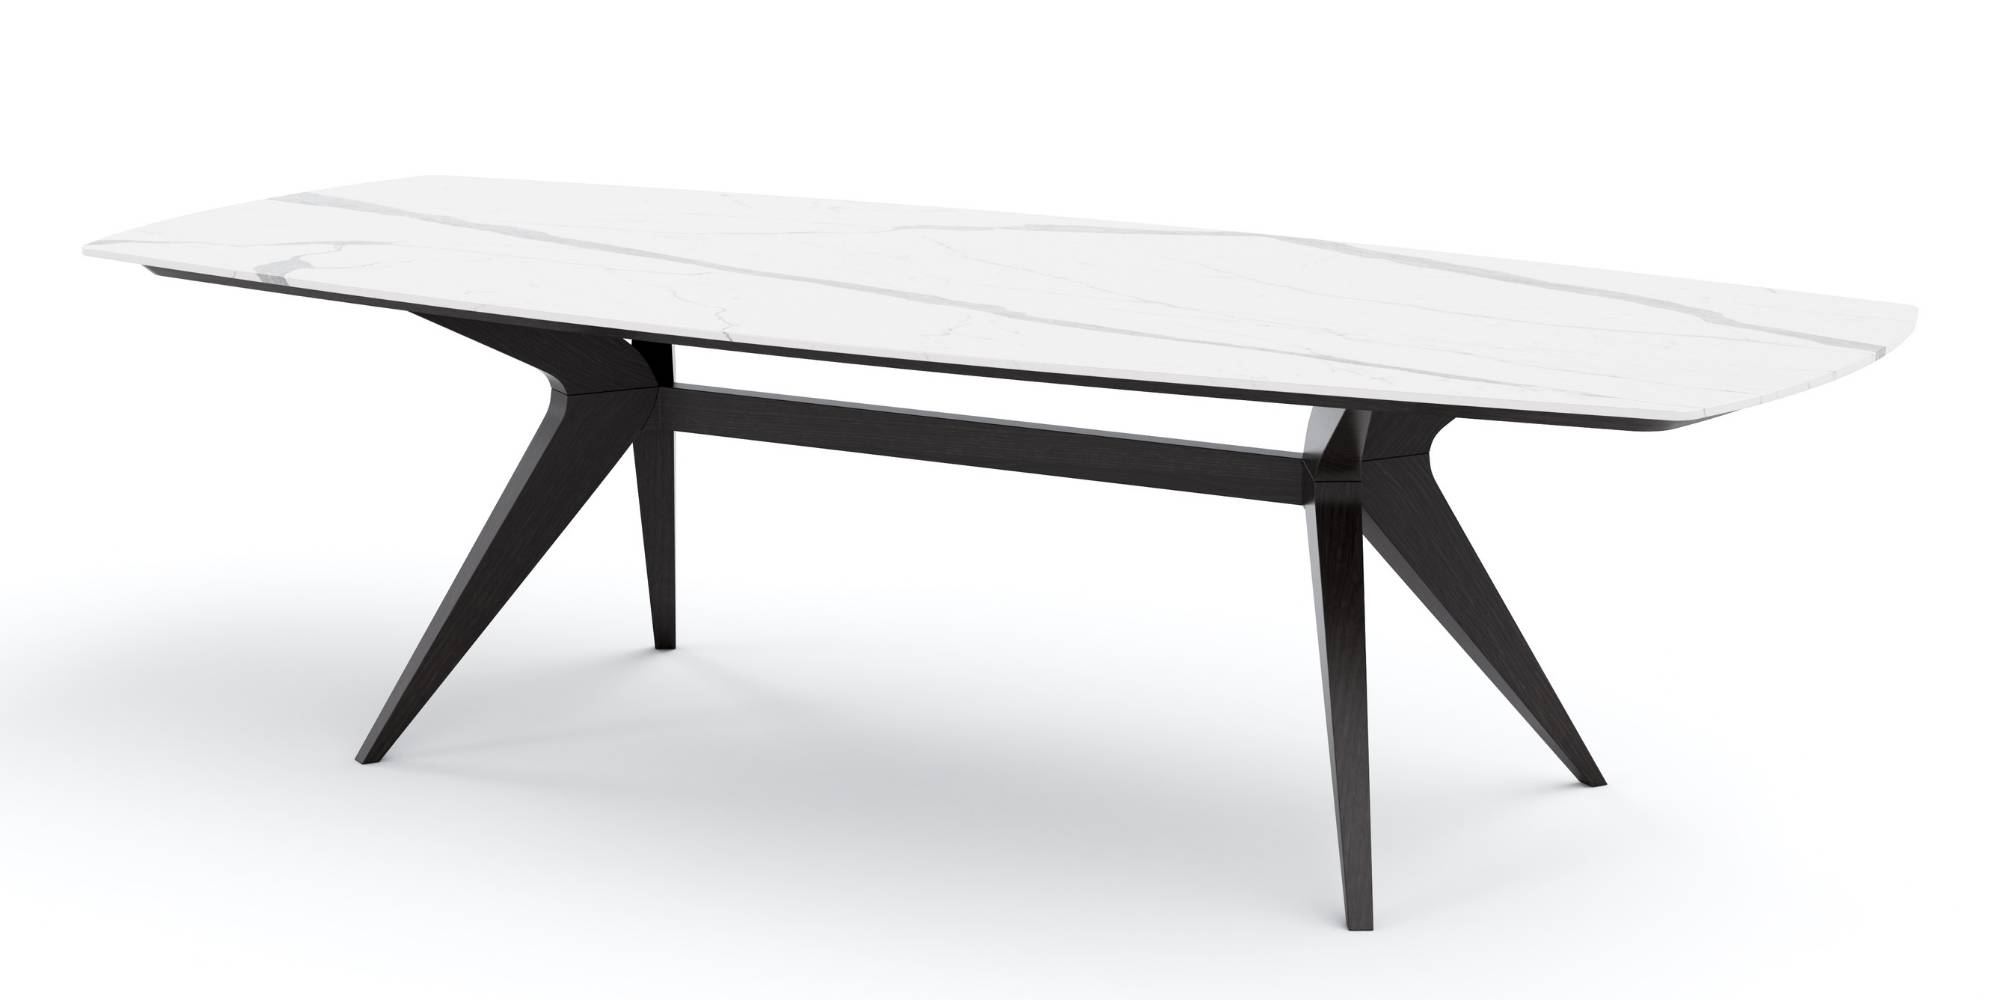 Tamarindo Round Coffee Table in Outdoor Tables Coffee Tables for Tamarindo collection